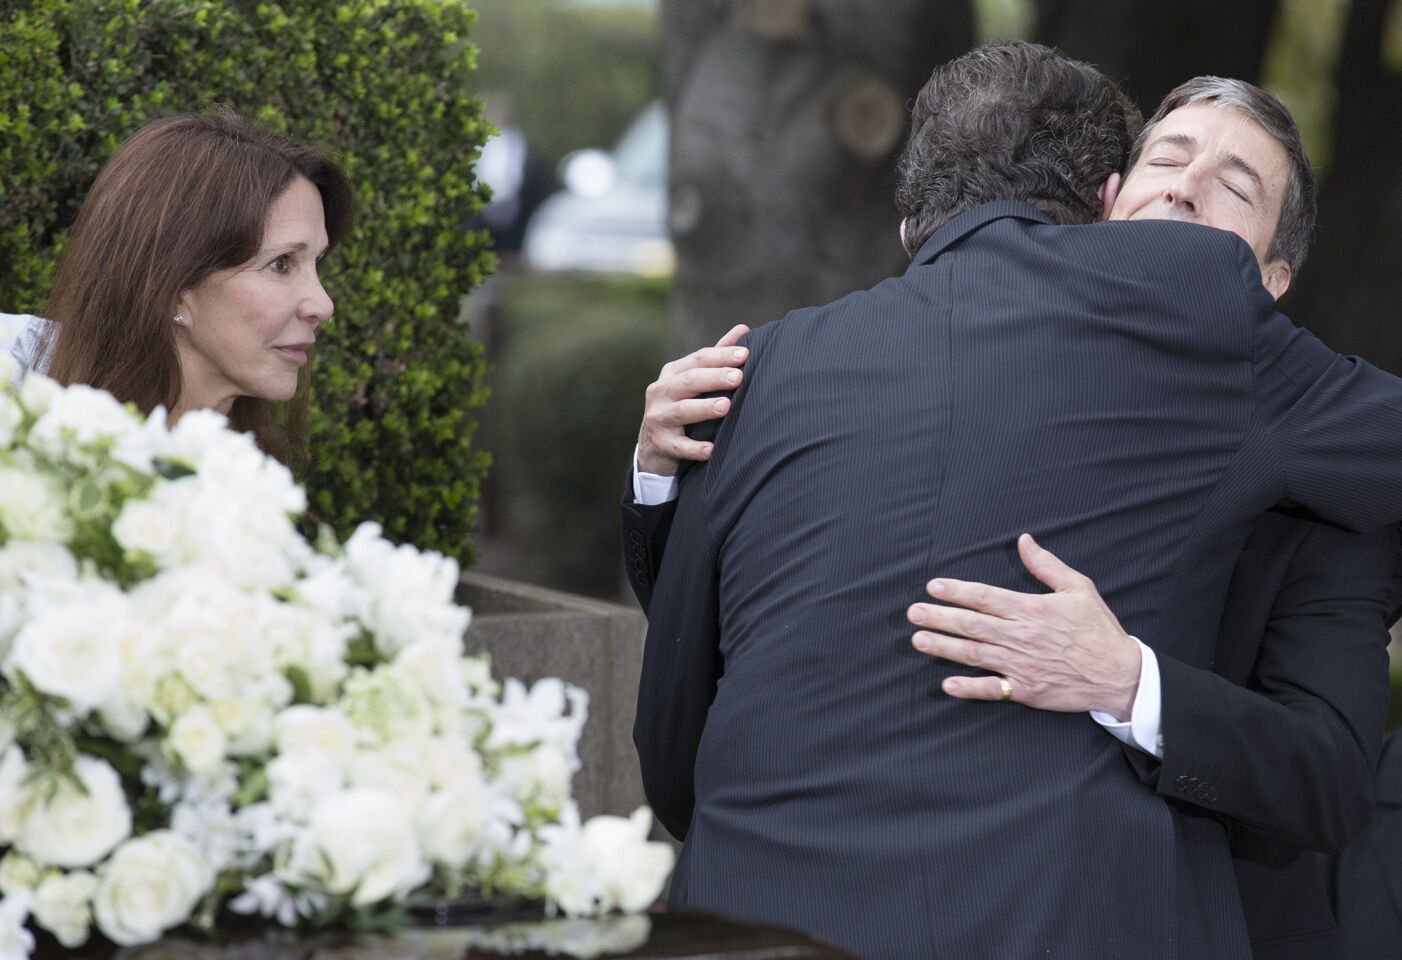 Ron Reagan hugs a mourner as his sister, Patti Davis, left, looks on during funeral services for their mother, Nancy Reagan, at the Ronald Reagan Presidential Library in Simi Valley.